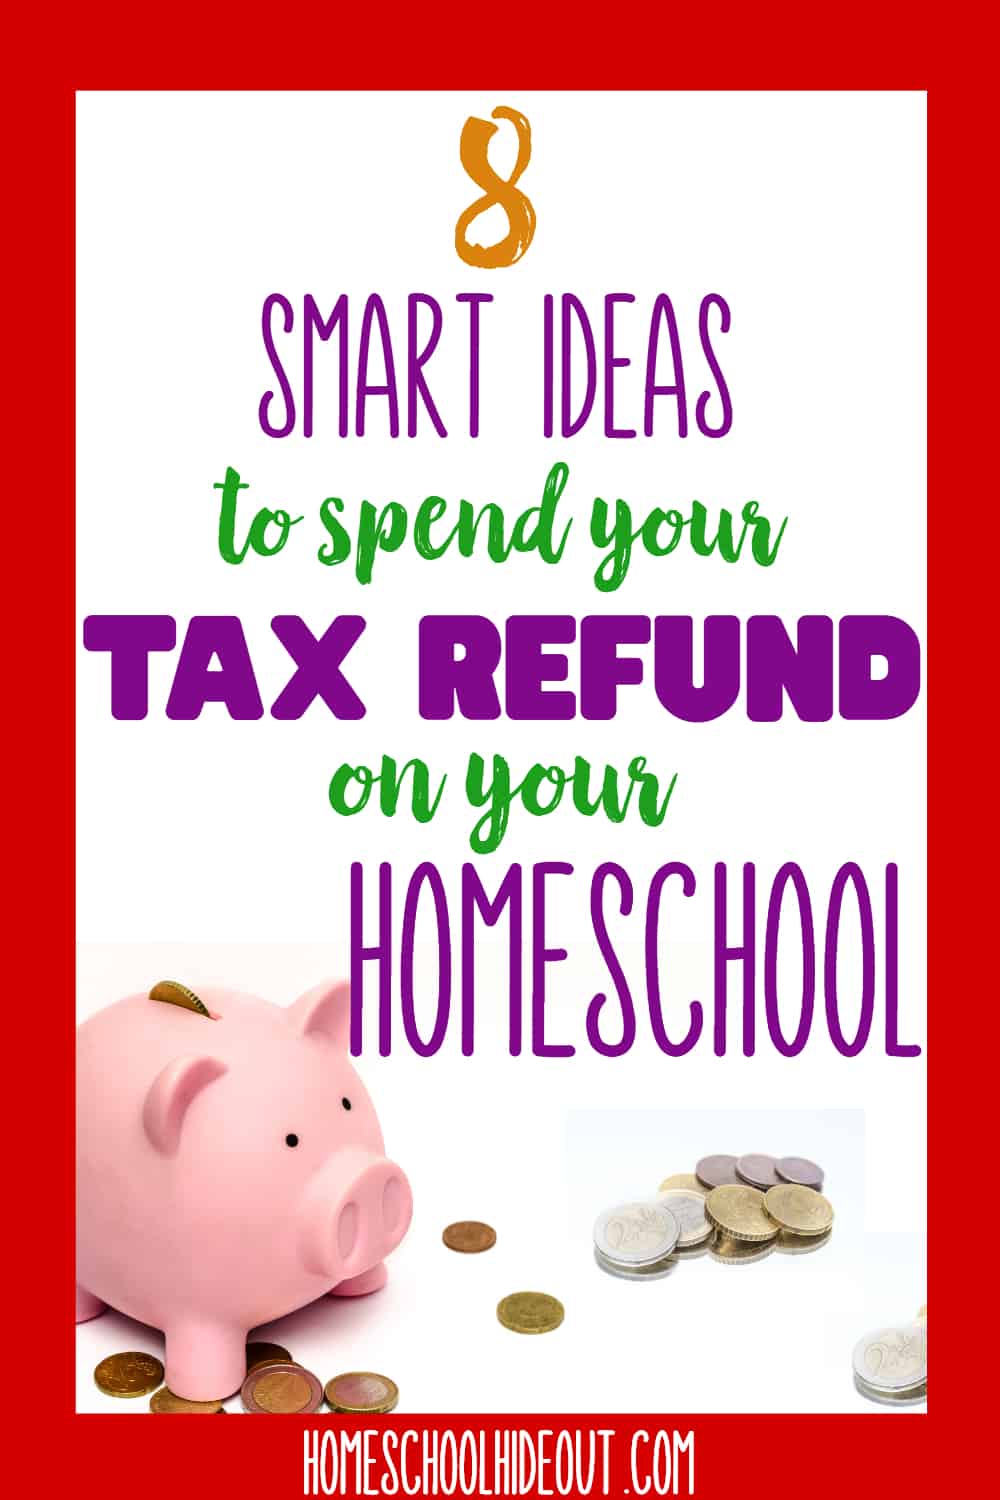 Smart ideas to help homeschoolers spend their tax refund wisely! #4 is a MUST-DO!